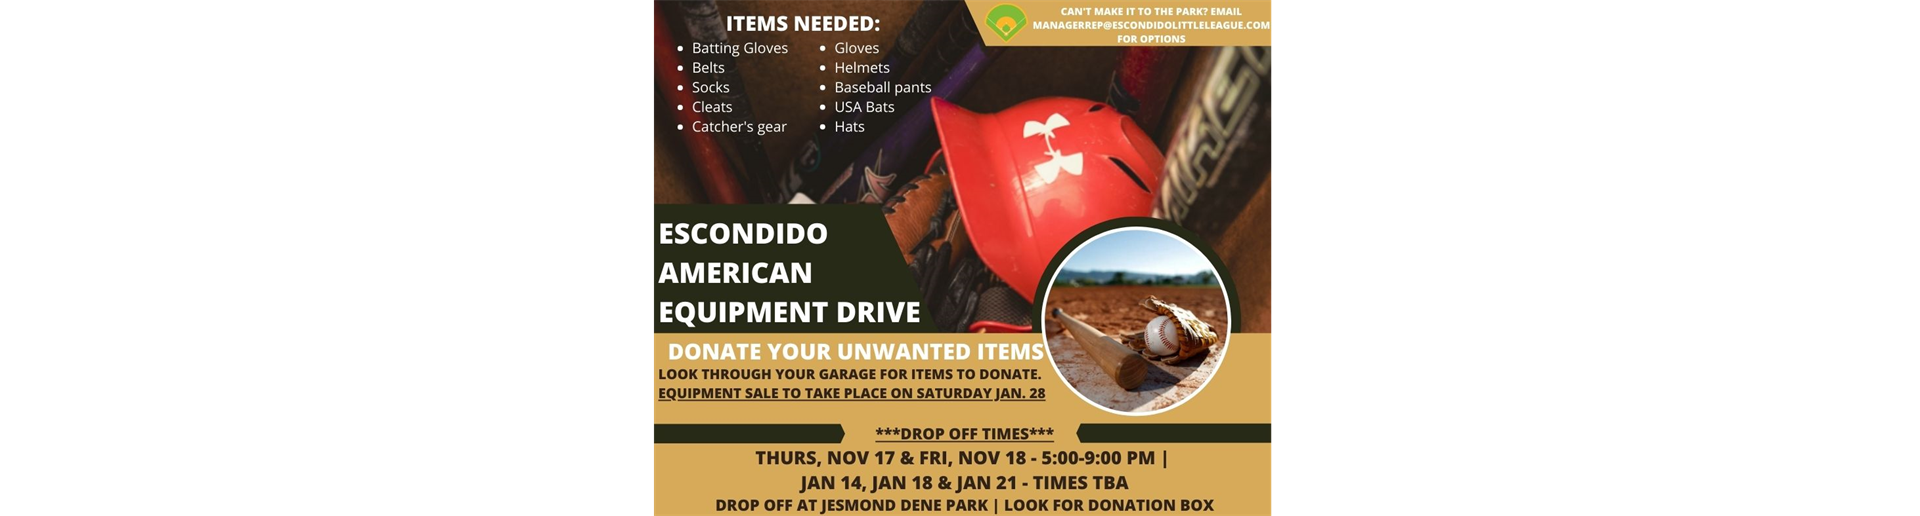 PLEASE DONATE TO THE EALL USED EQUIPMENT DRIVE!